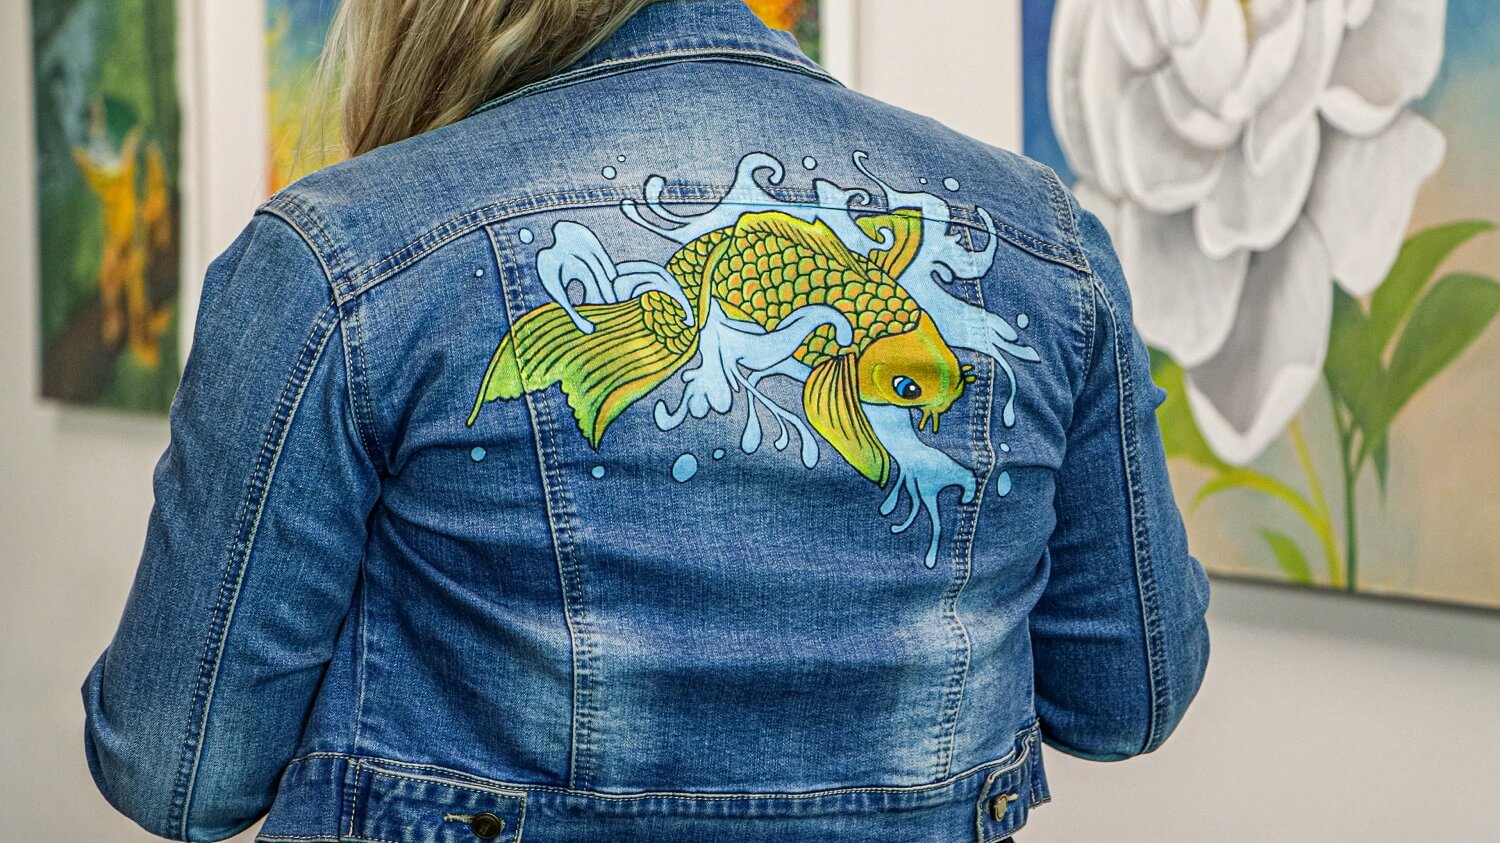 Blonde woman wearing a blue denim jacket with a yellow koi fish painted on the back.